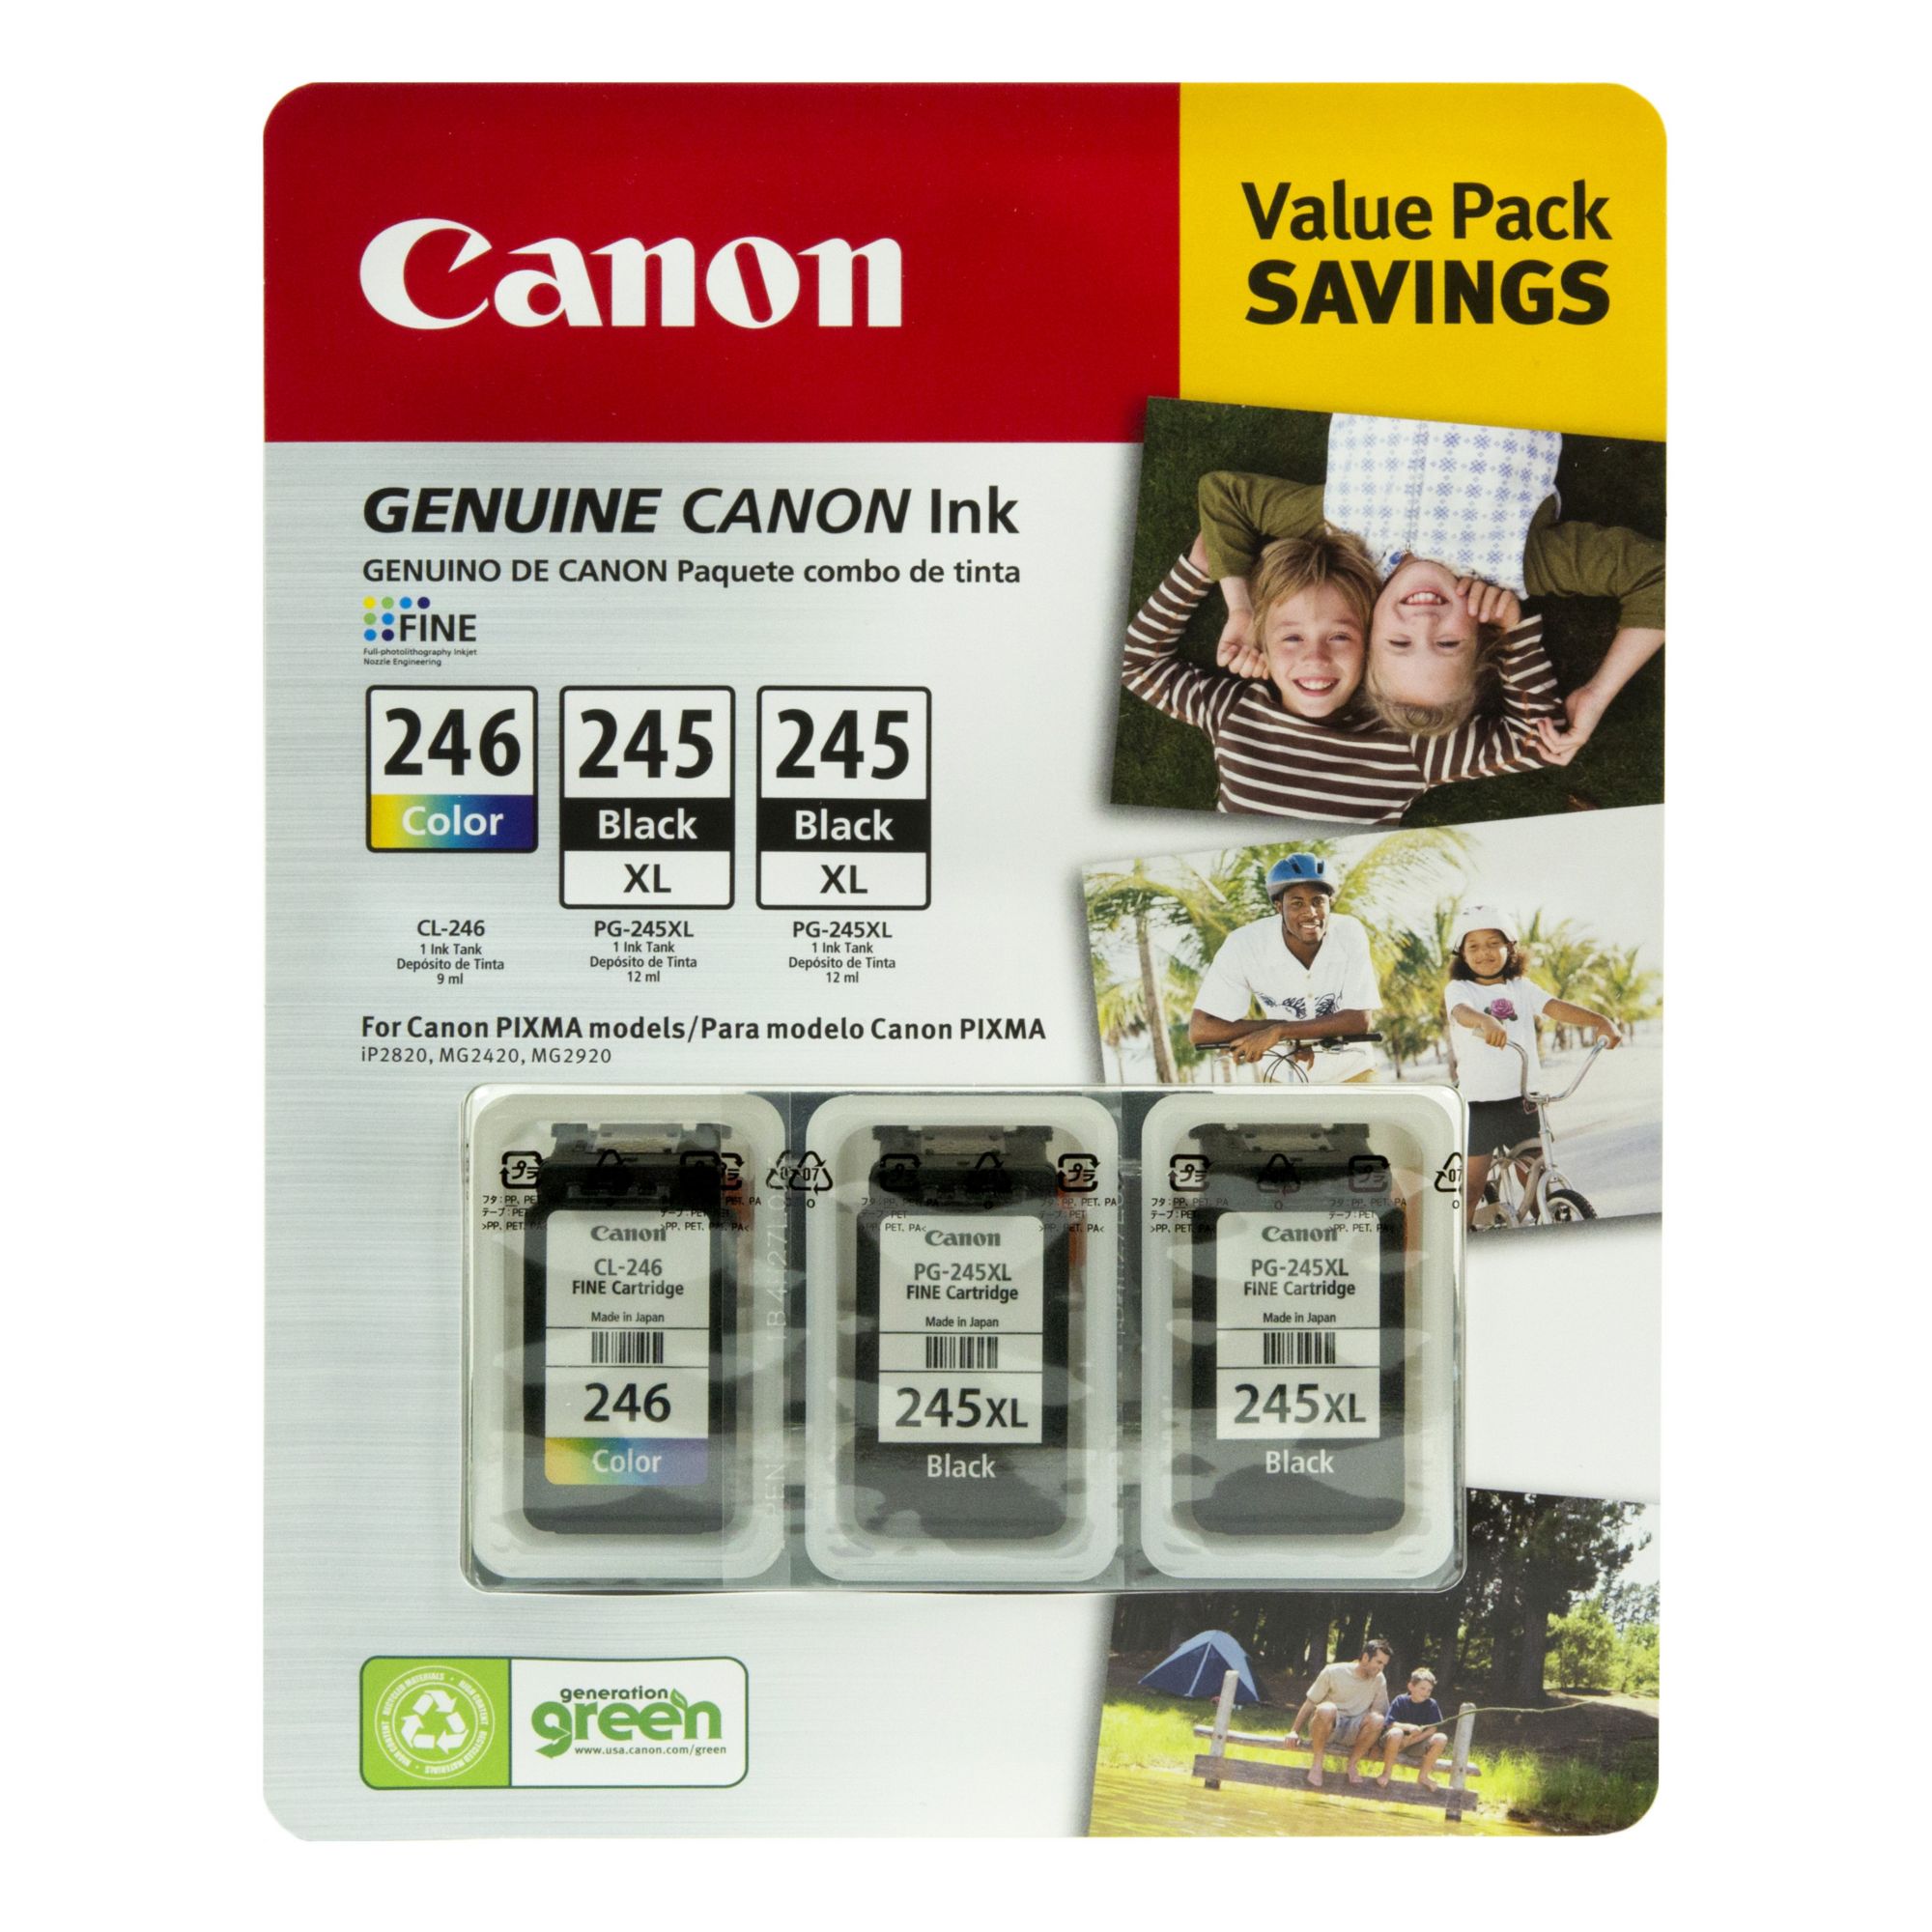 canon-printer-ink-coupons-printable-tutore-org-master-of-documents